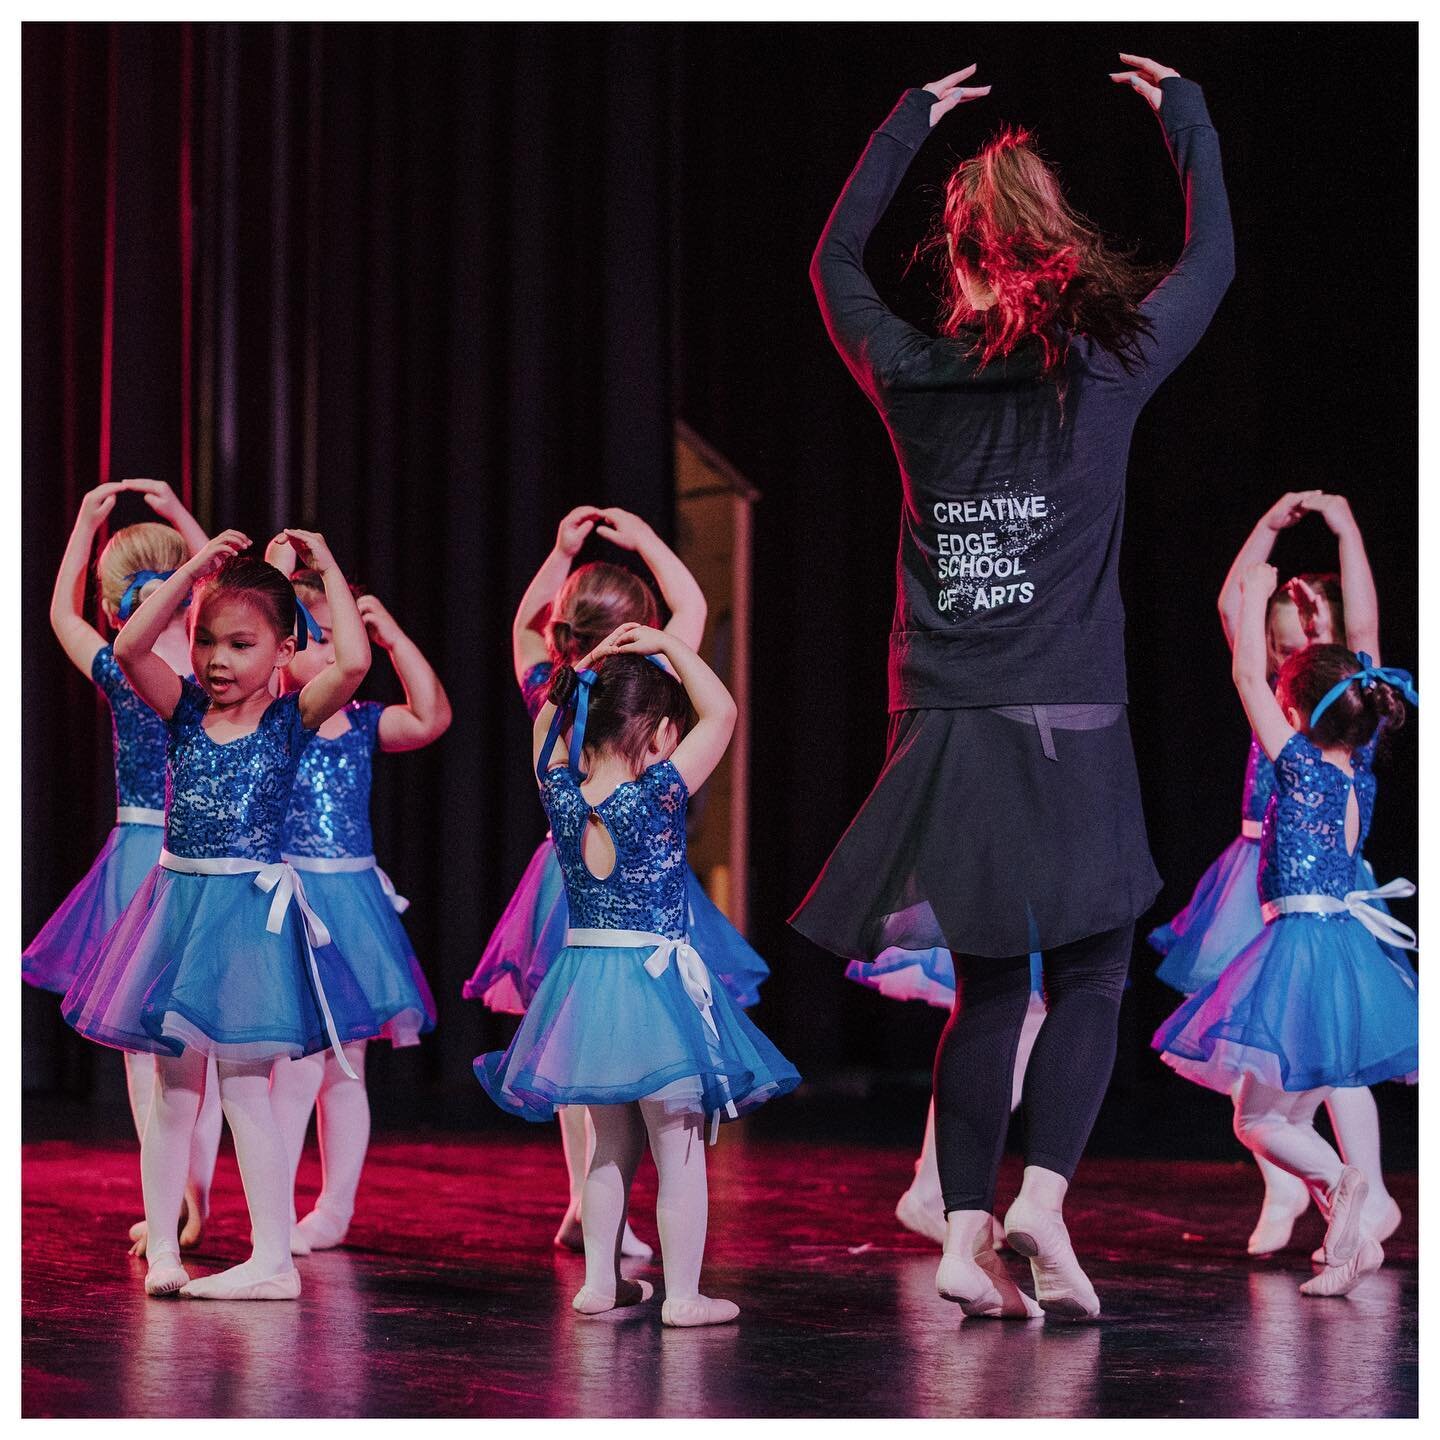 Did you know we have dance classes starting at age 1?
.
.
🔹My First Class (Ages 1-2) Parent and Tot dancing, crafts and more. 
🔹Ballet Babies (Ages 2-3)
🔹Predance (Ages 3-4, Ballet dance class with performance)
🔹Mini Jazz/Lyrical (Ages 2.5-4)
🔹M